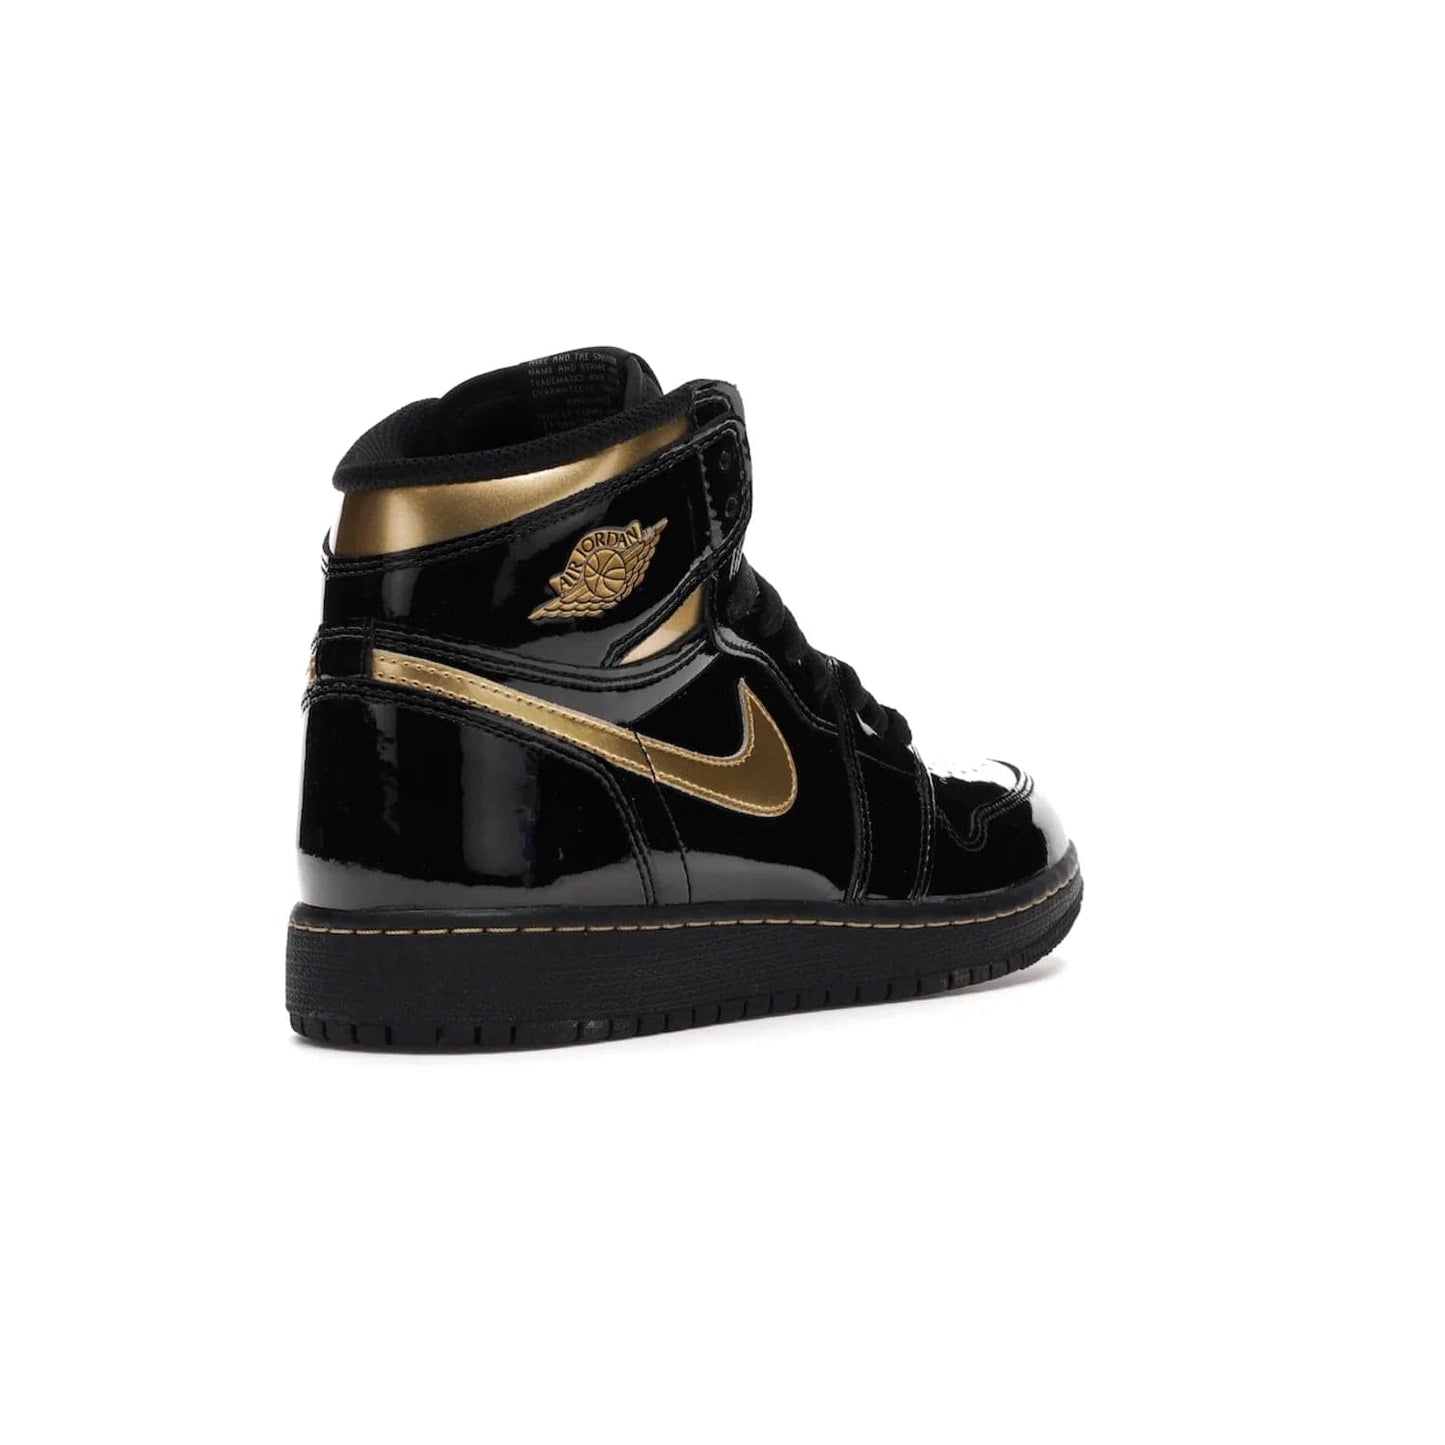 Jordan 1 Retro High Black Metallic Gold (2020) (GS) - Image 32 - Only at www.BallersClubKickz.com - Shop the Kids Air Jordan 1 Retro High in Black Metallic Gold for a stylish and comfortable sneaker kids can love. Featuring black and metallic gold patent leather uppers, metallic gold accents, and an Air sole unit for extra cushioning.